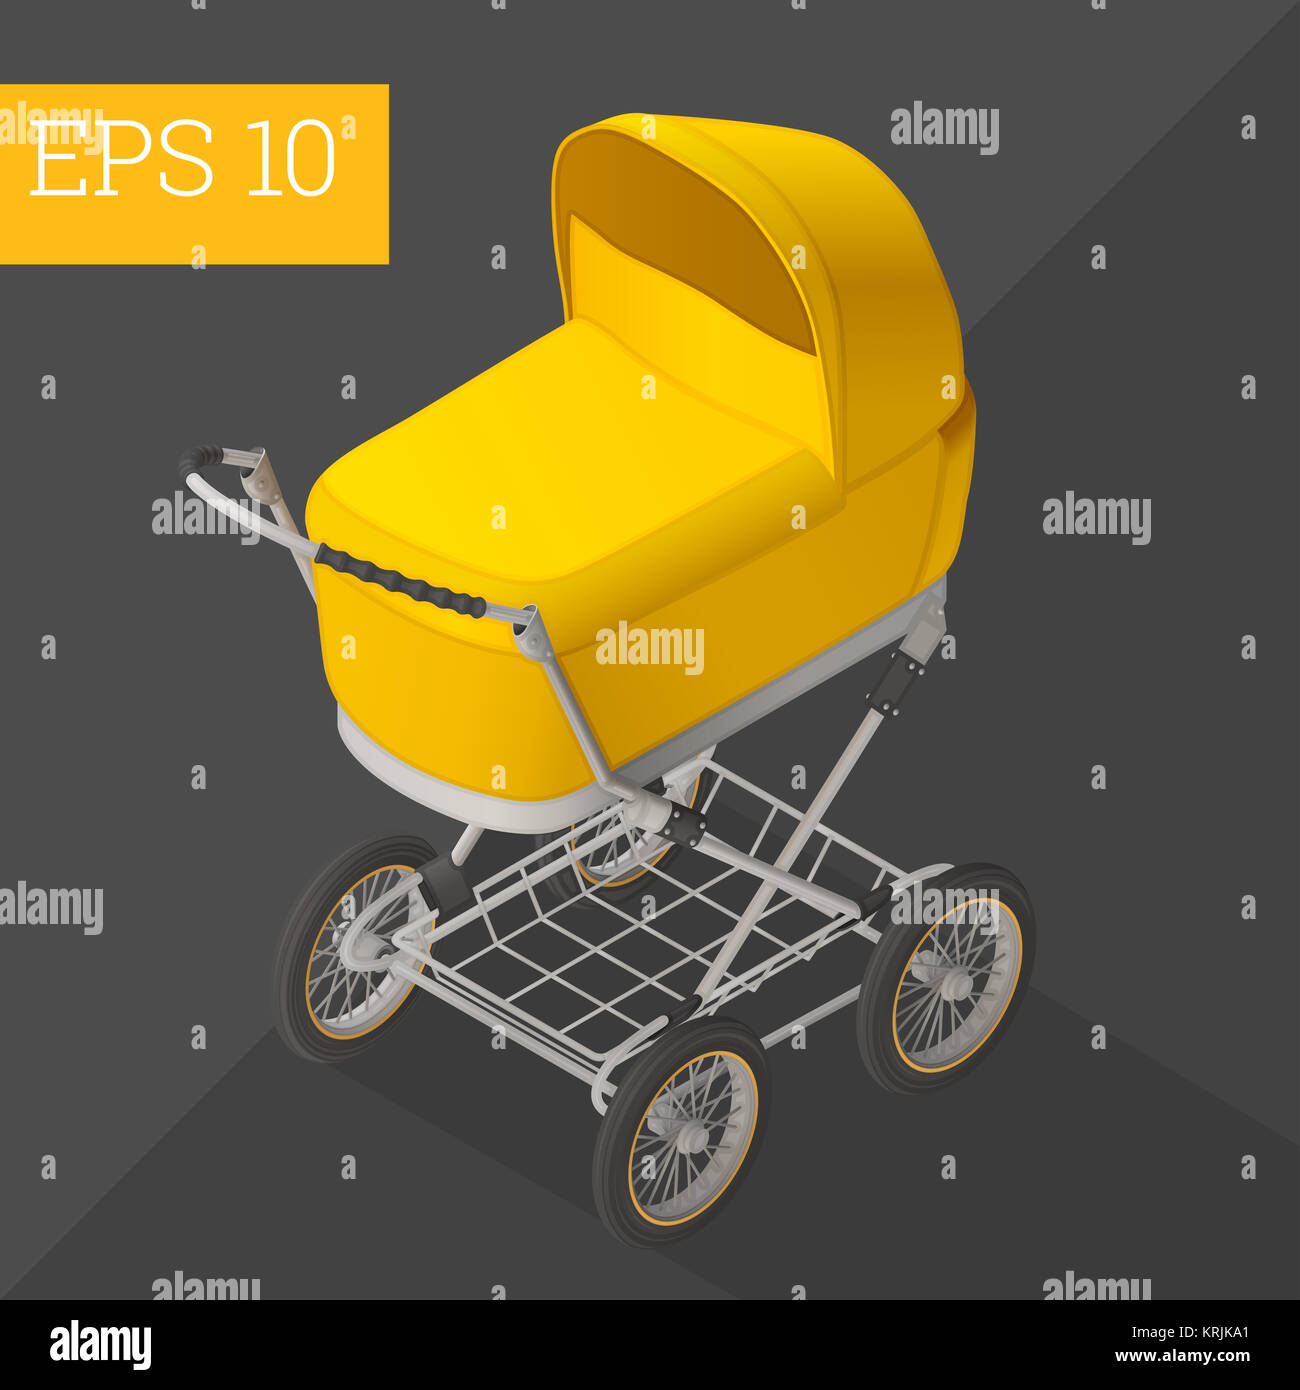 baby carriage isometric vector illustration Stock Photo